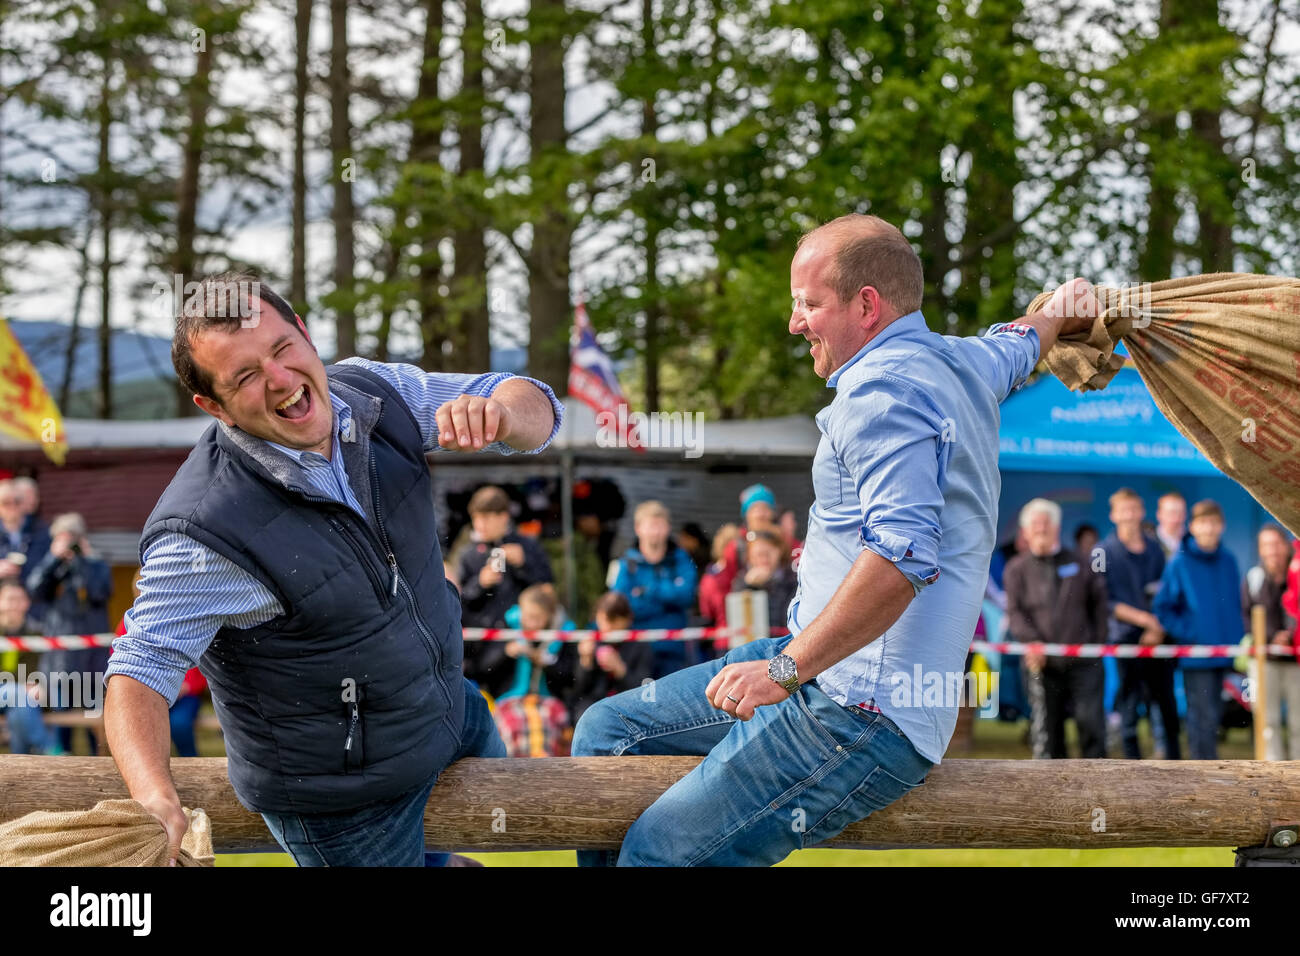 Tomintoul, Moray, Scotland, 16th July 2016. This is the pillow fight contest at the Tomintoul Highland Games, Moray, Scotland. Stock Photo